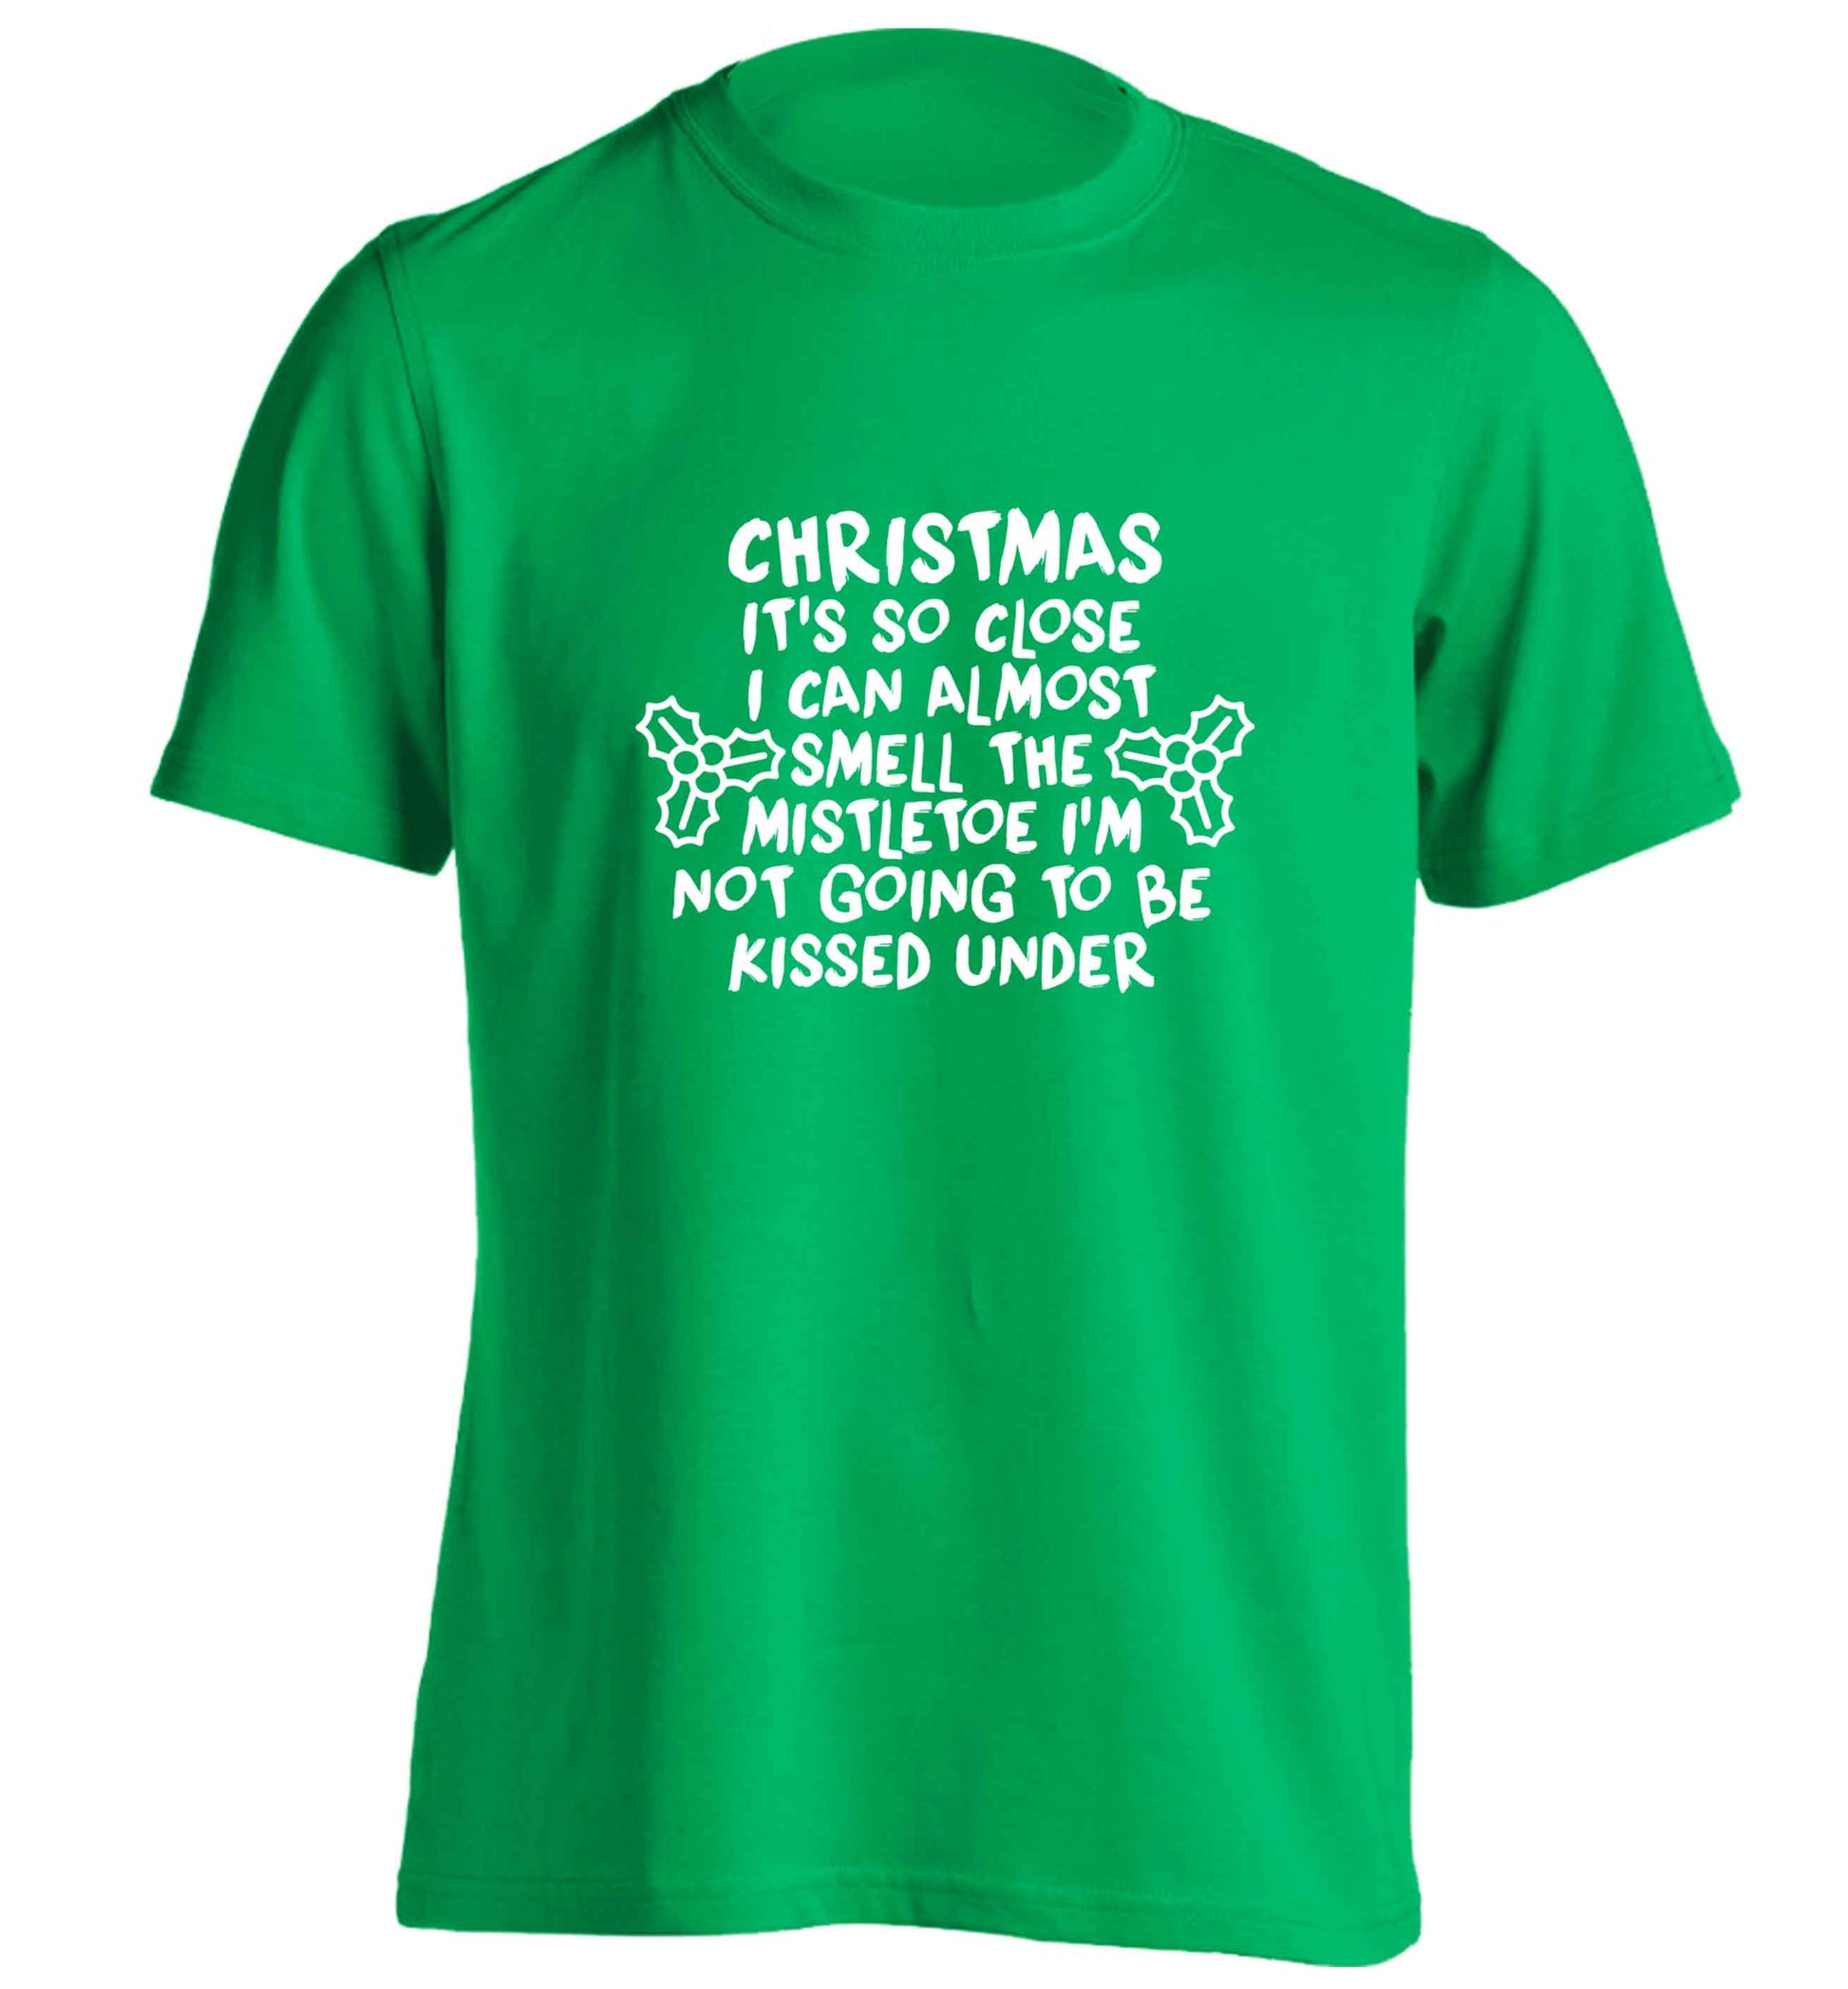 Christmas it's so close I can almost smell the misteltoe I'm not going to be kissed under adults unisex green Tshirt 2XL